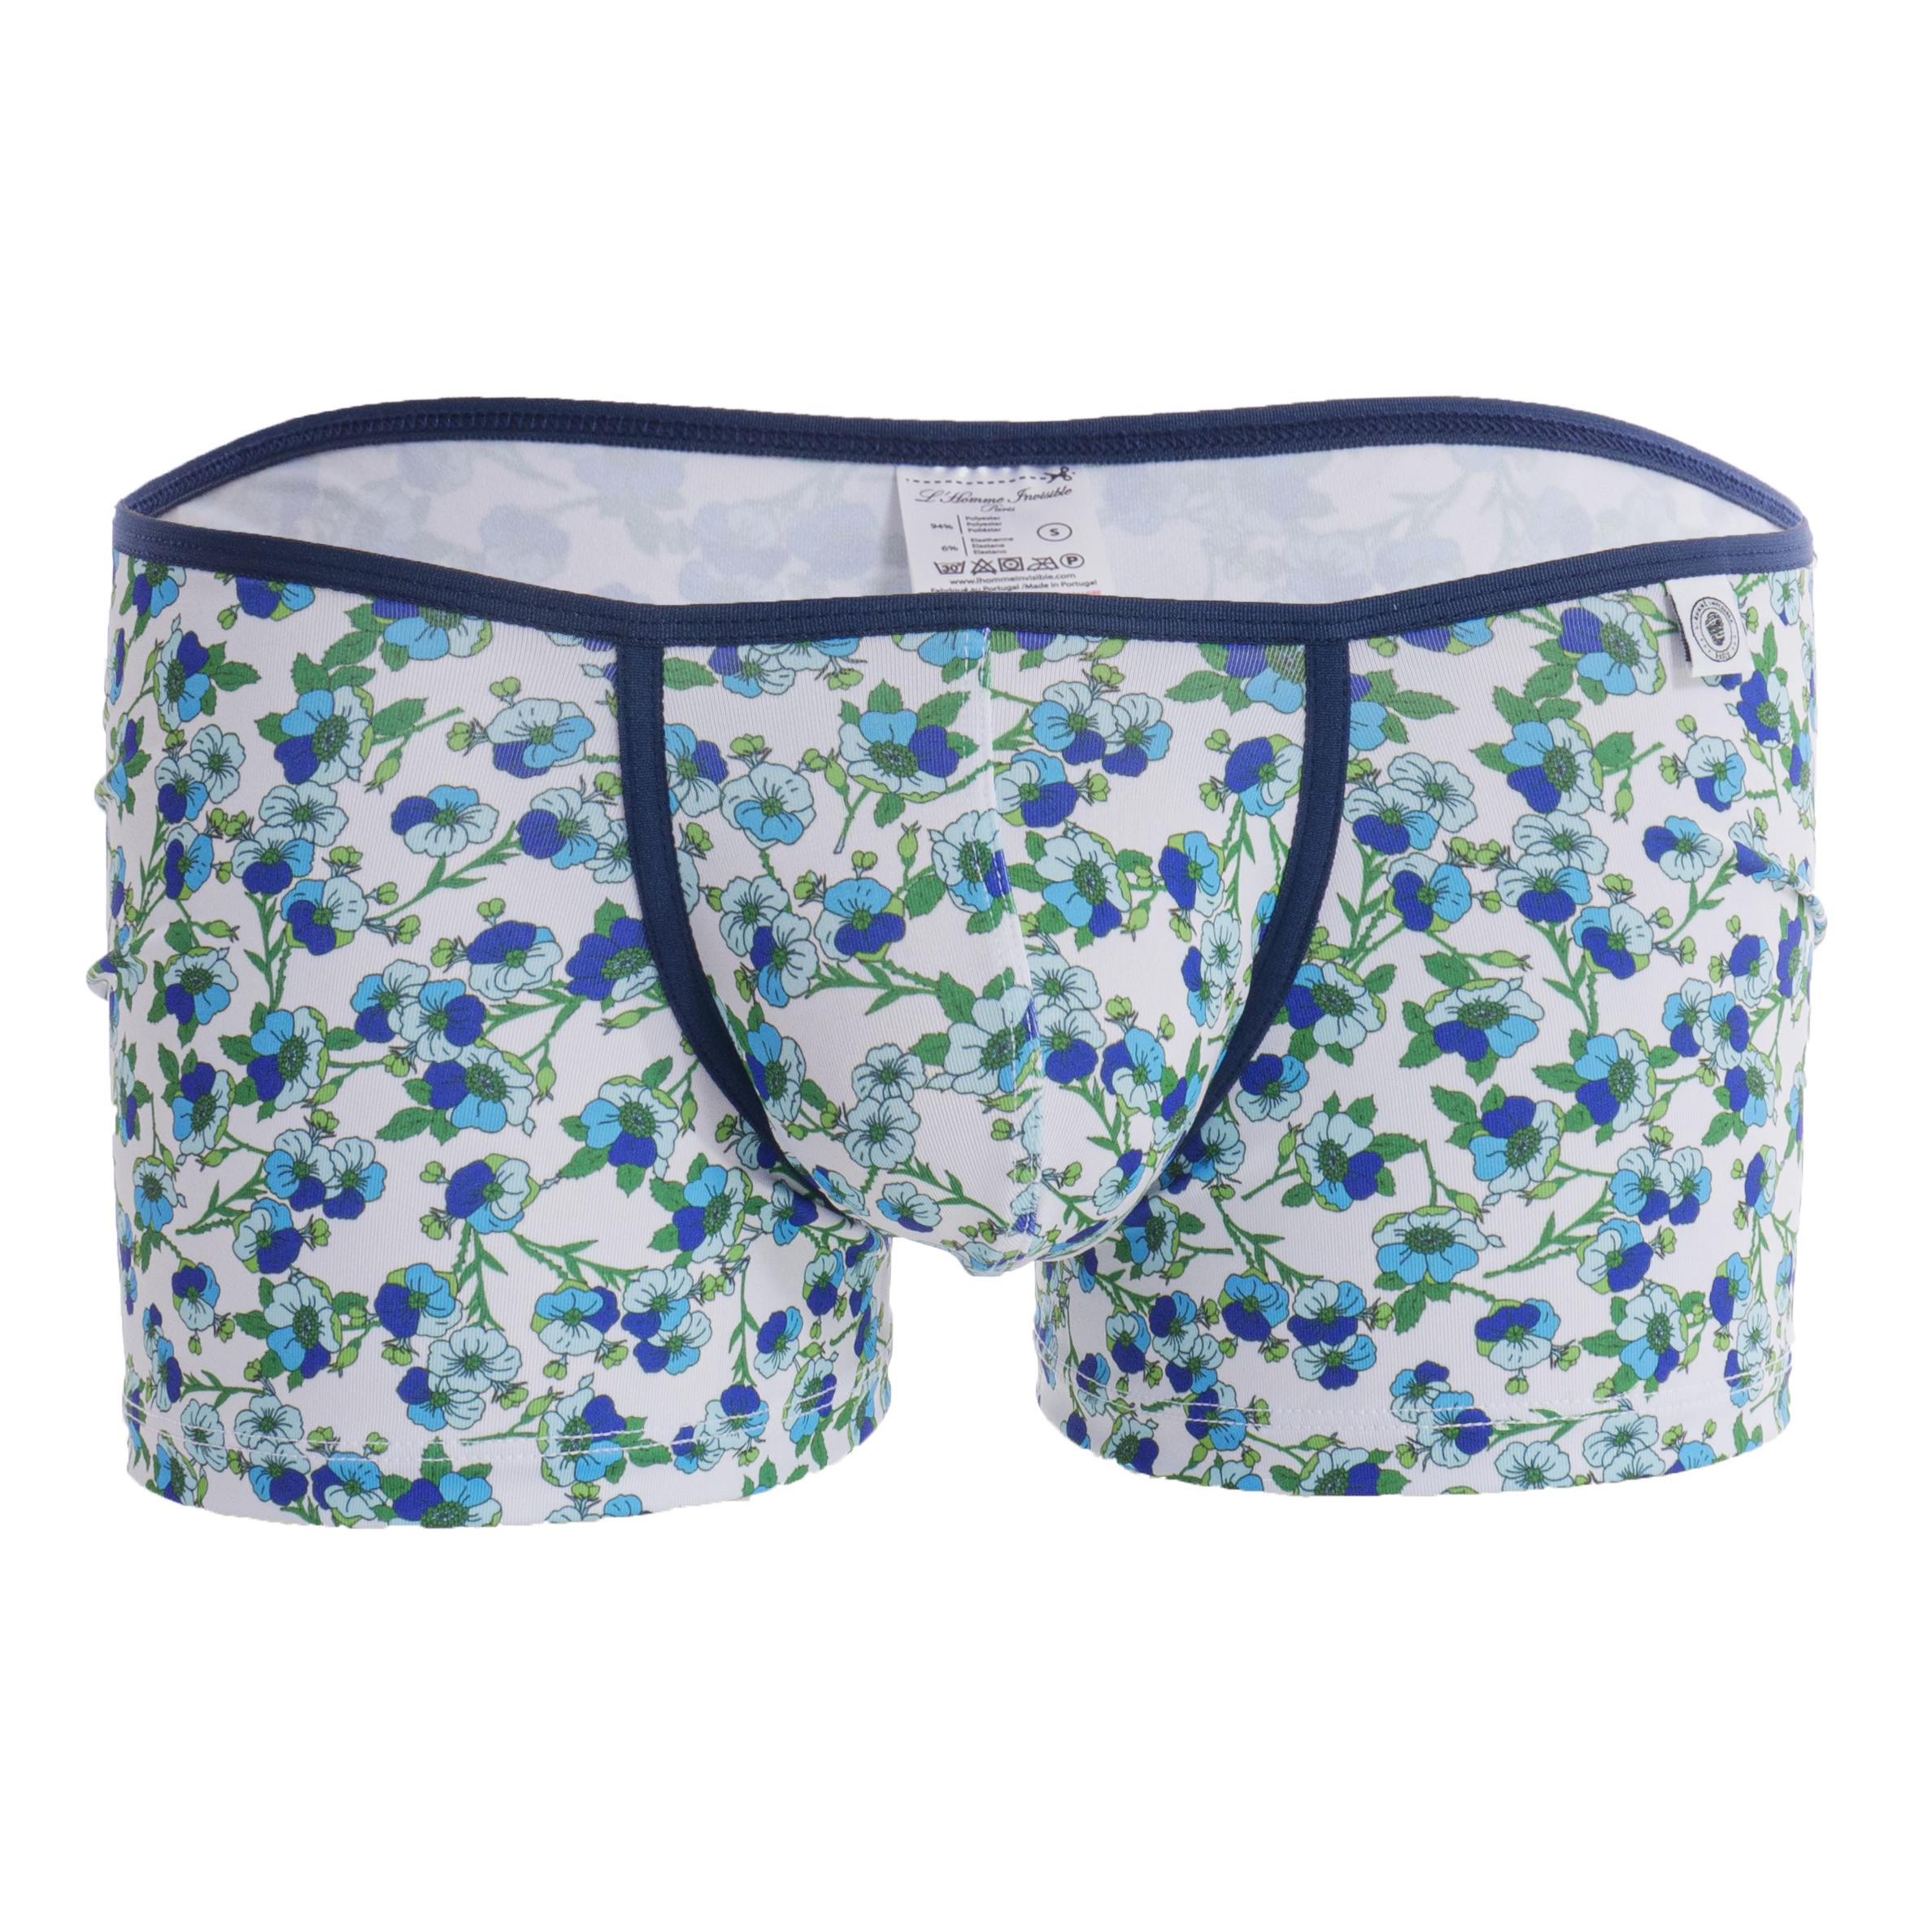 Myosotis - Invisible Boxer: Boxers for man brand L'Homme Invisible